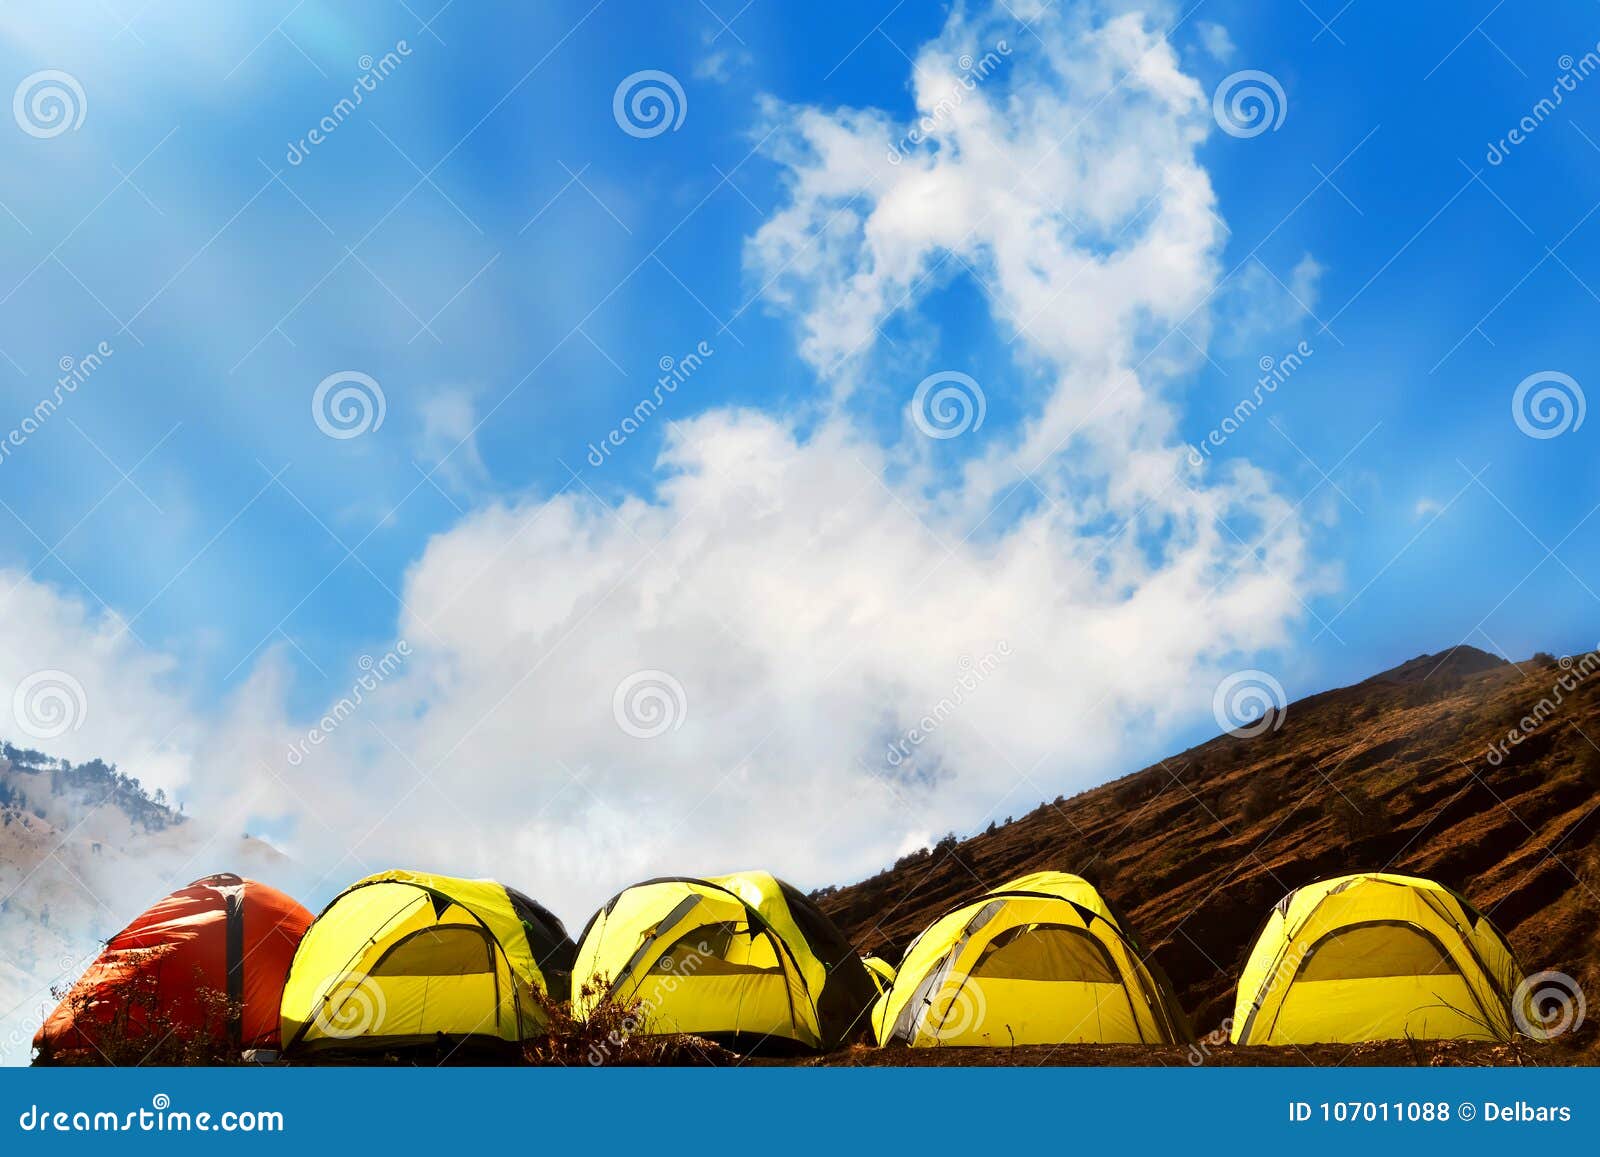 campground in the mountains. many yellow adn red tents against the blue sky with amazing clouds